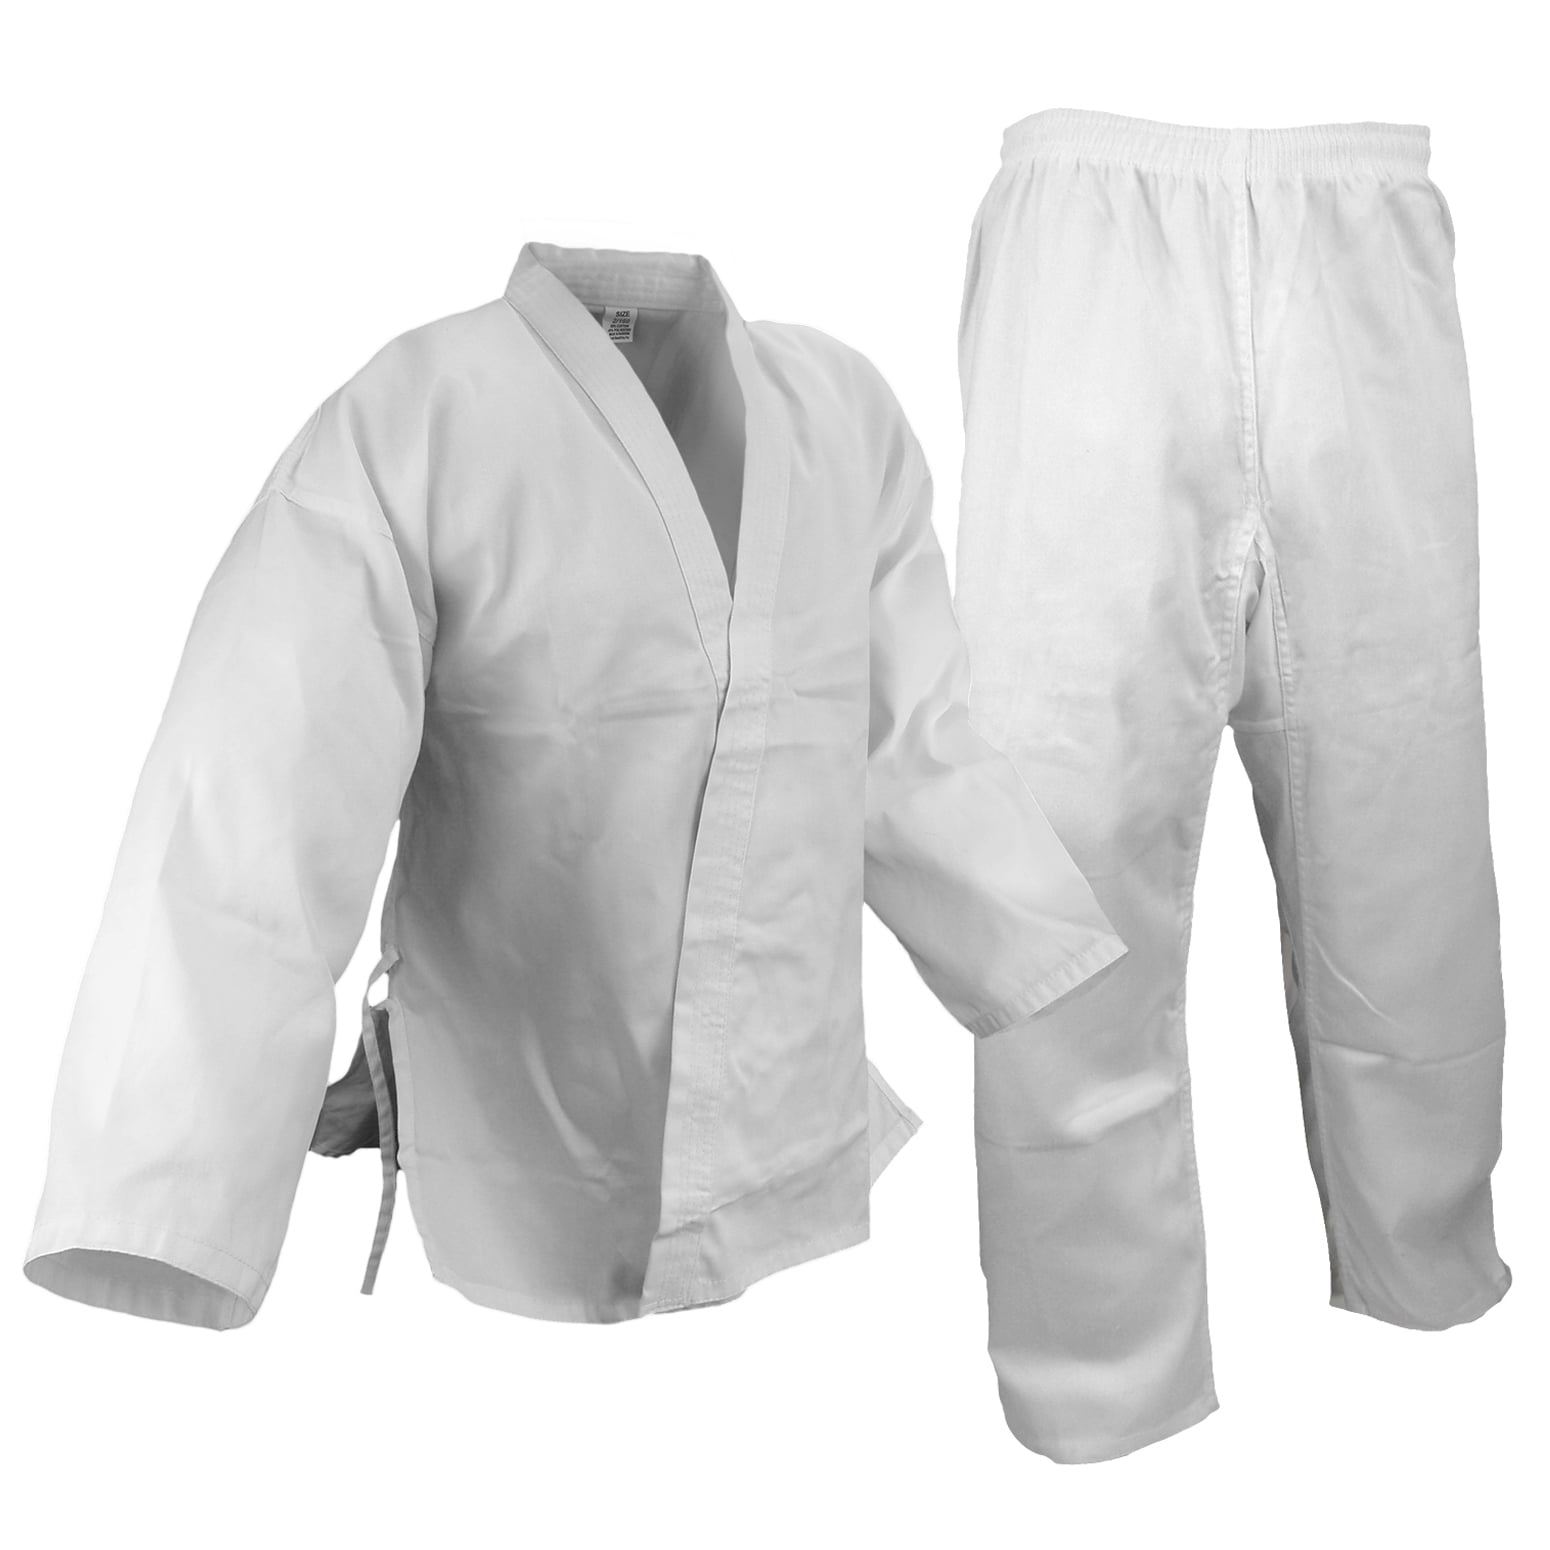 Karate Uniform Martial Arts Student Gi Child Youth Adult Lightweight with Belt 